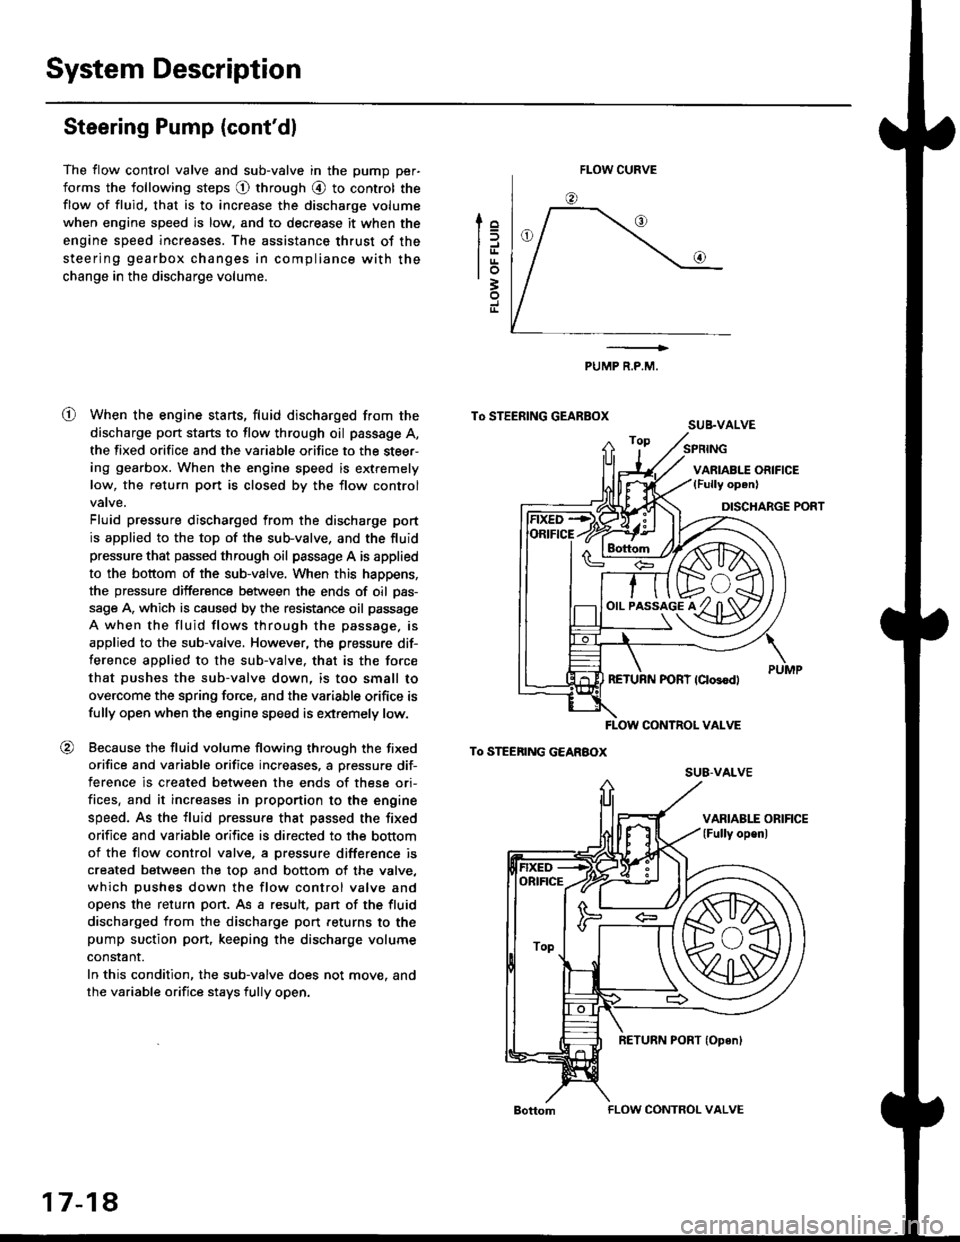 HONDA CIVIC 1998 6.G Owners Guide System Description
Steering Pump (contdl
The flow control valve and sub-valve in the pump per-
forms the following steps @ through @ to control the
flow of fluid, that is to increase the discharge vo